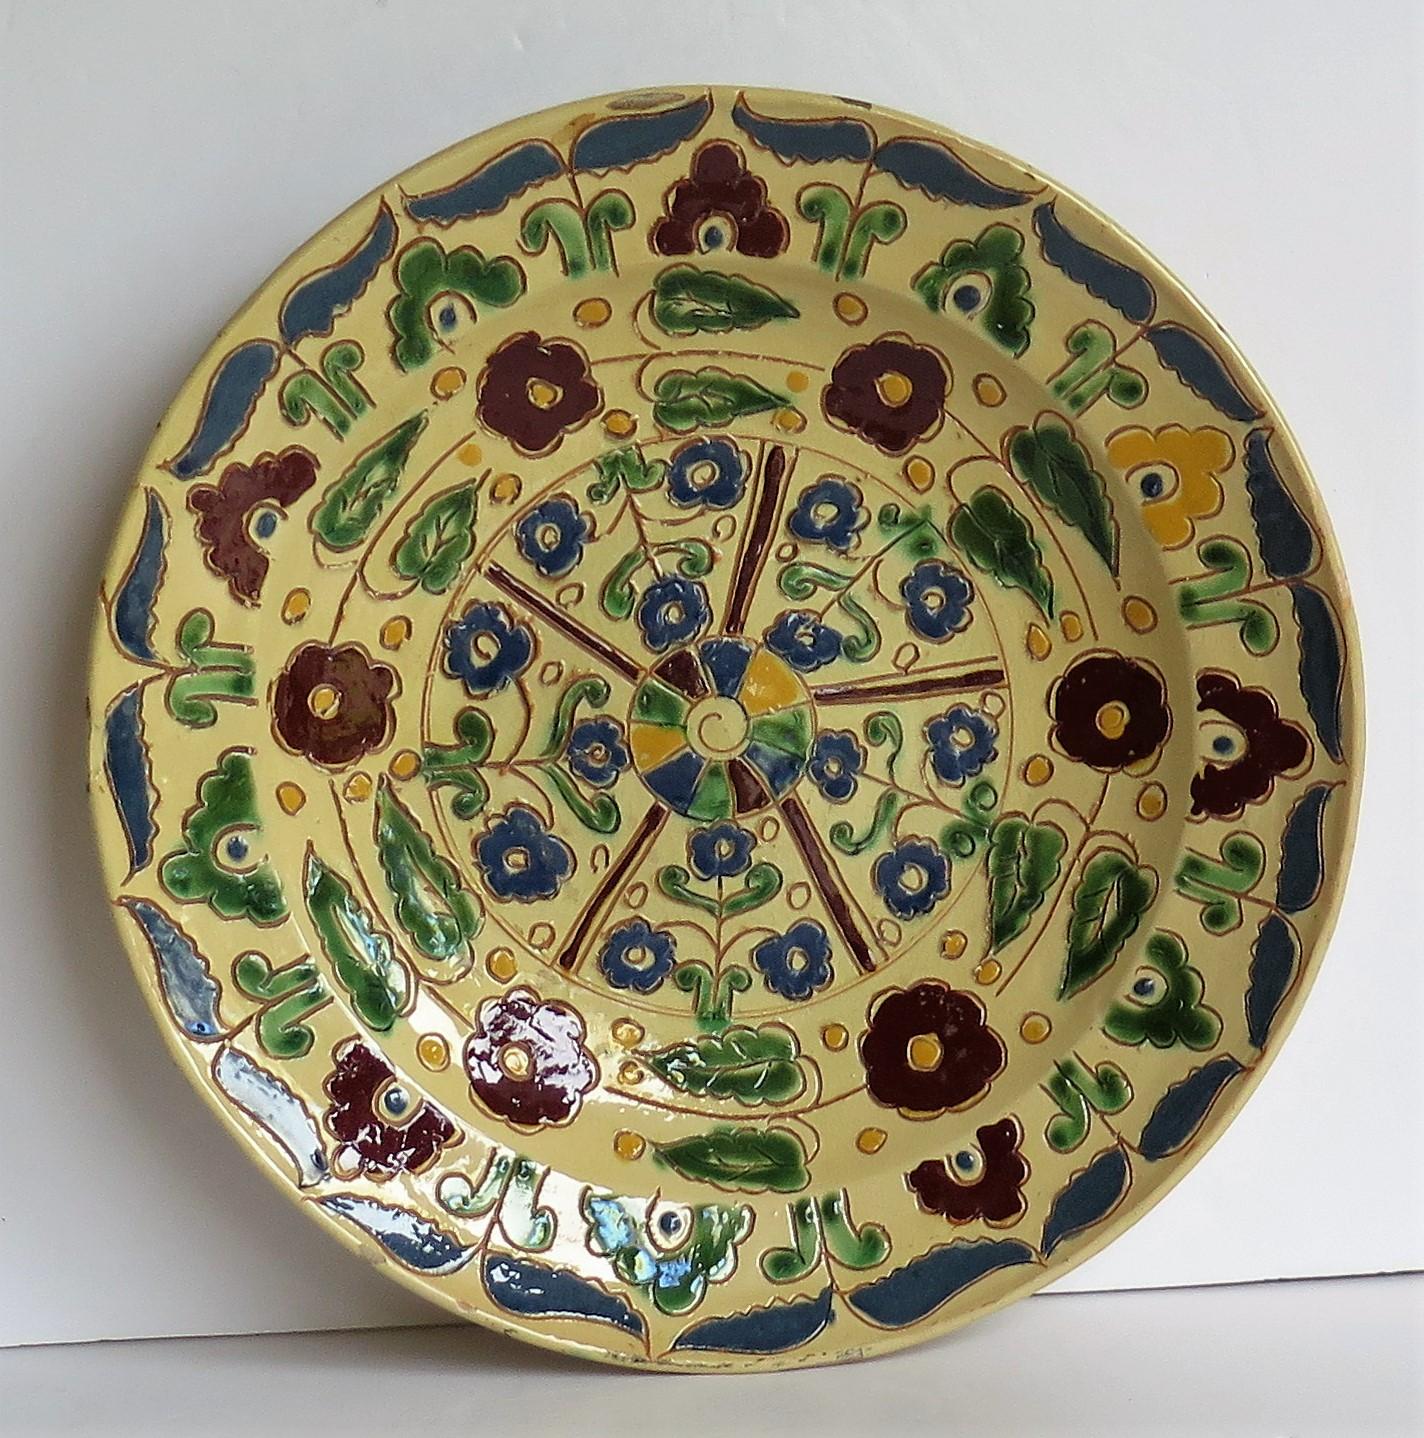 A large charger plate made of Redware pottery, all hand decorated in the Sgraffito Slip Decorated technique, with a stylized floral pattern. 

This is a large 11.75 inch diameter plate / charger or dish raised on a low foot. 

This bold pattern has